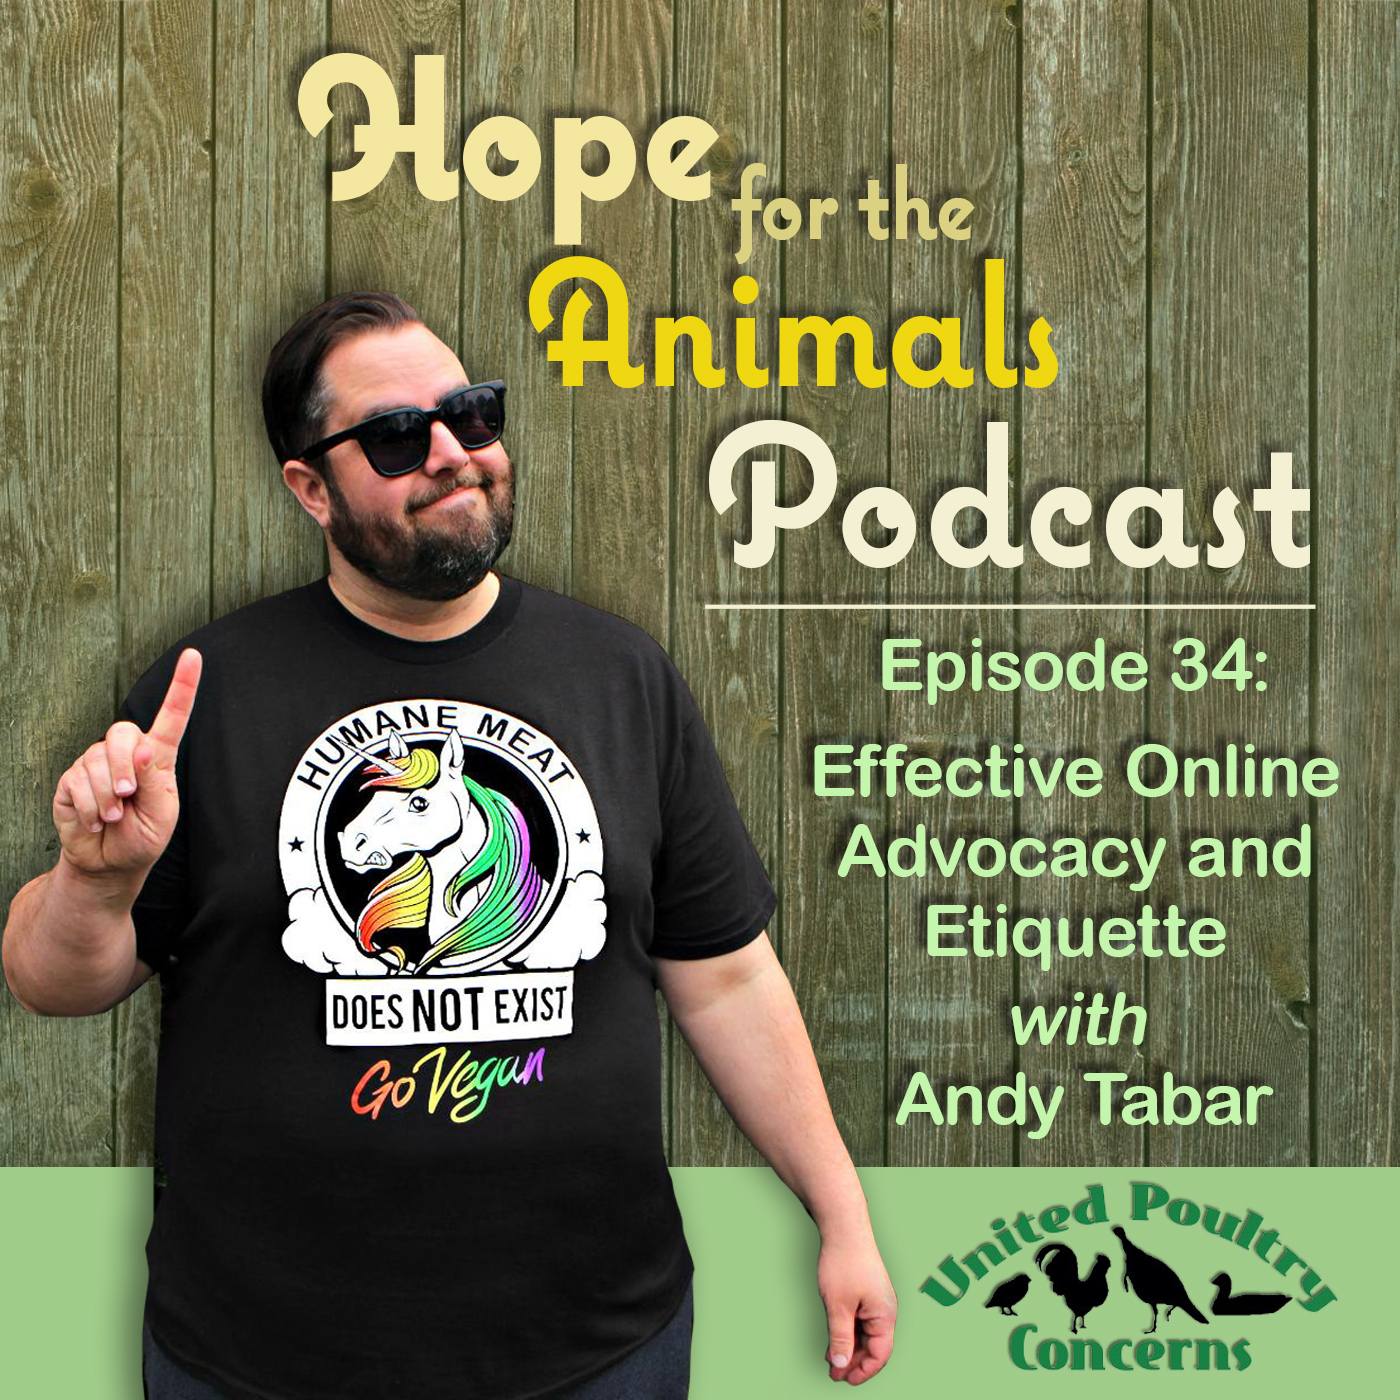 Episode 34: Effective Online Vegan Advocacy and Etiquette with Andy Tabar